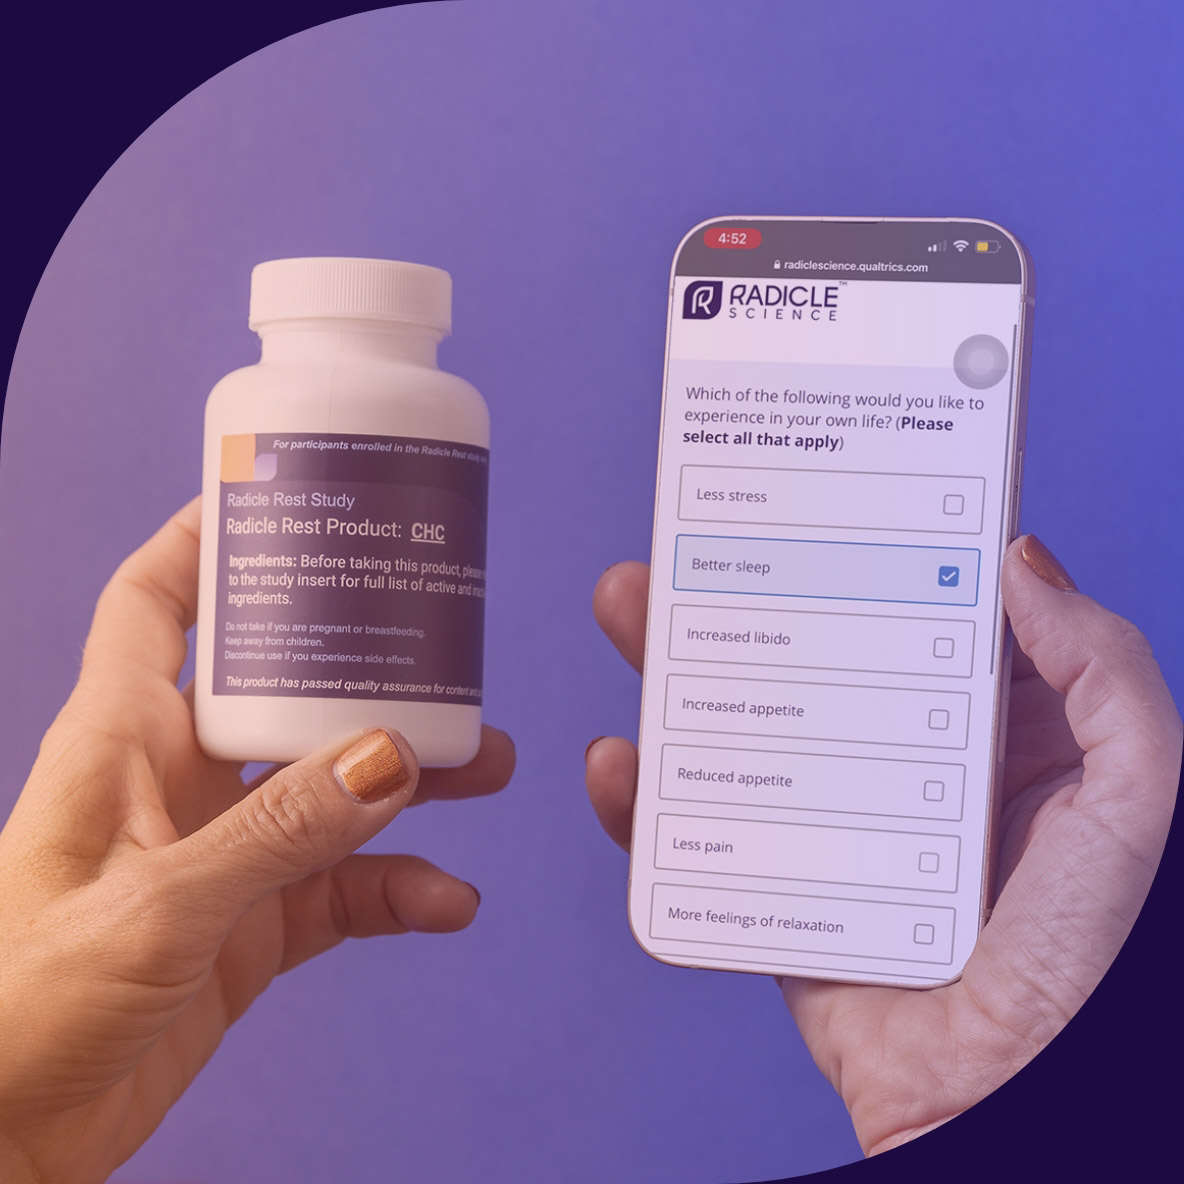 Image with a sample Radicle Rest Product pill bottle on the left hand, and a phone on the right hand showing an example of a participant pre-screener survey